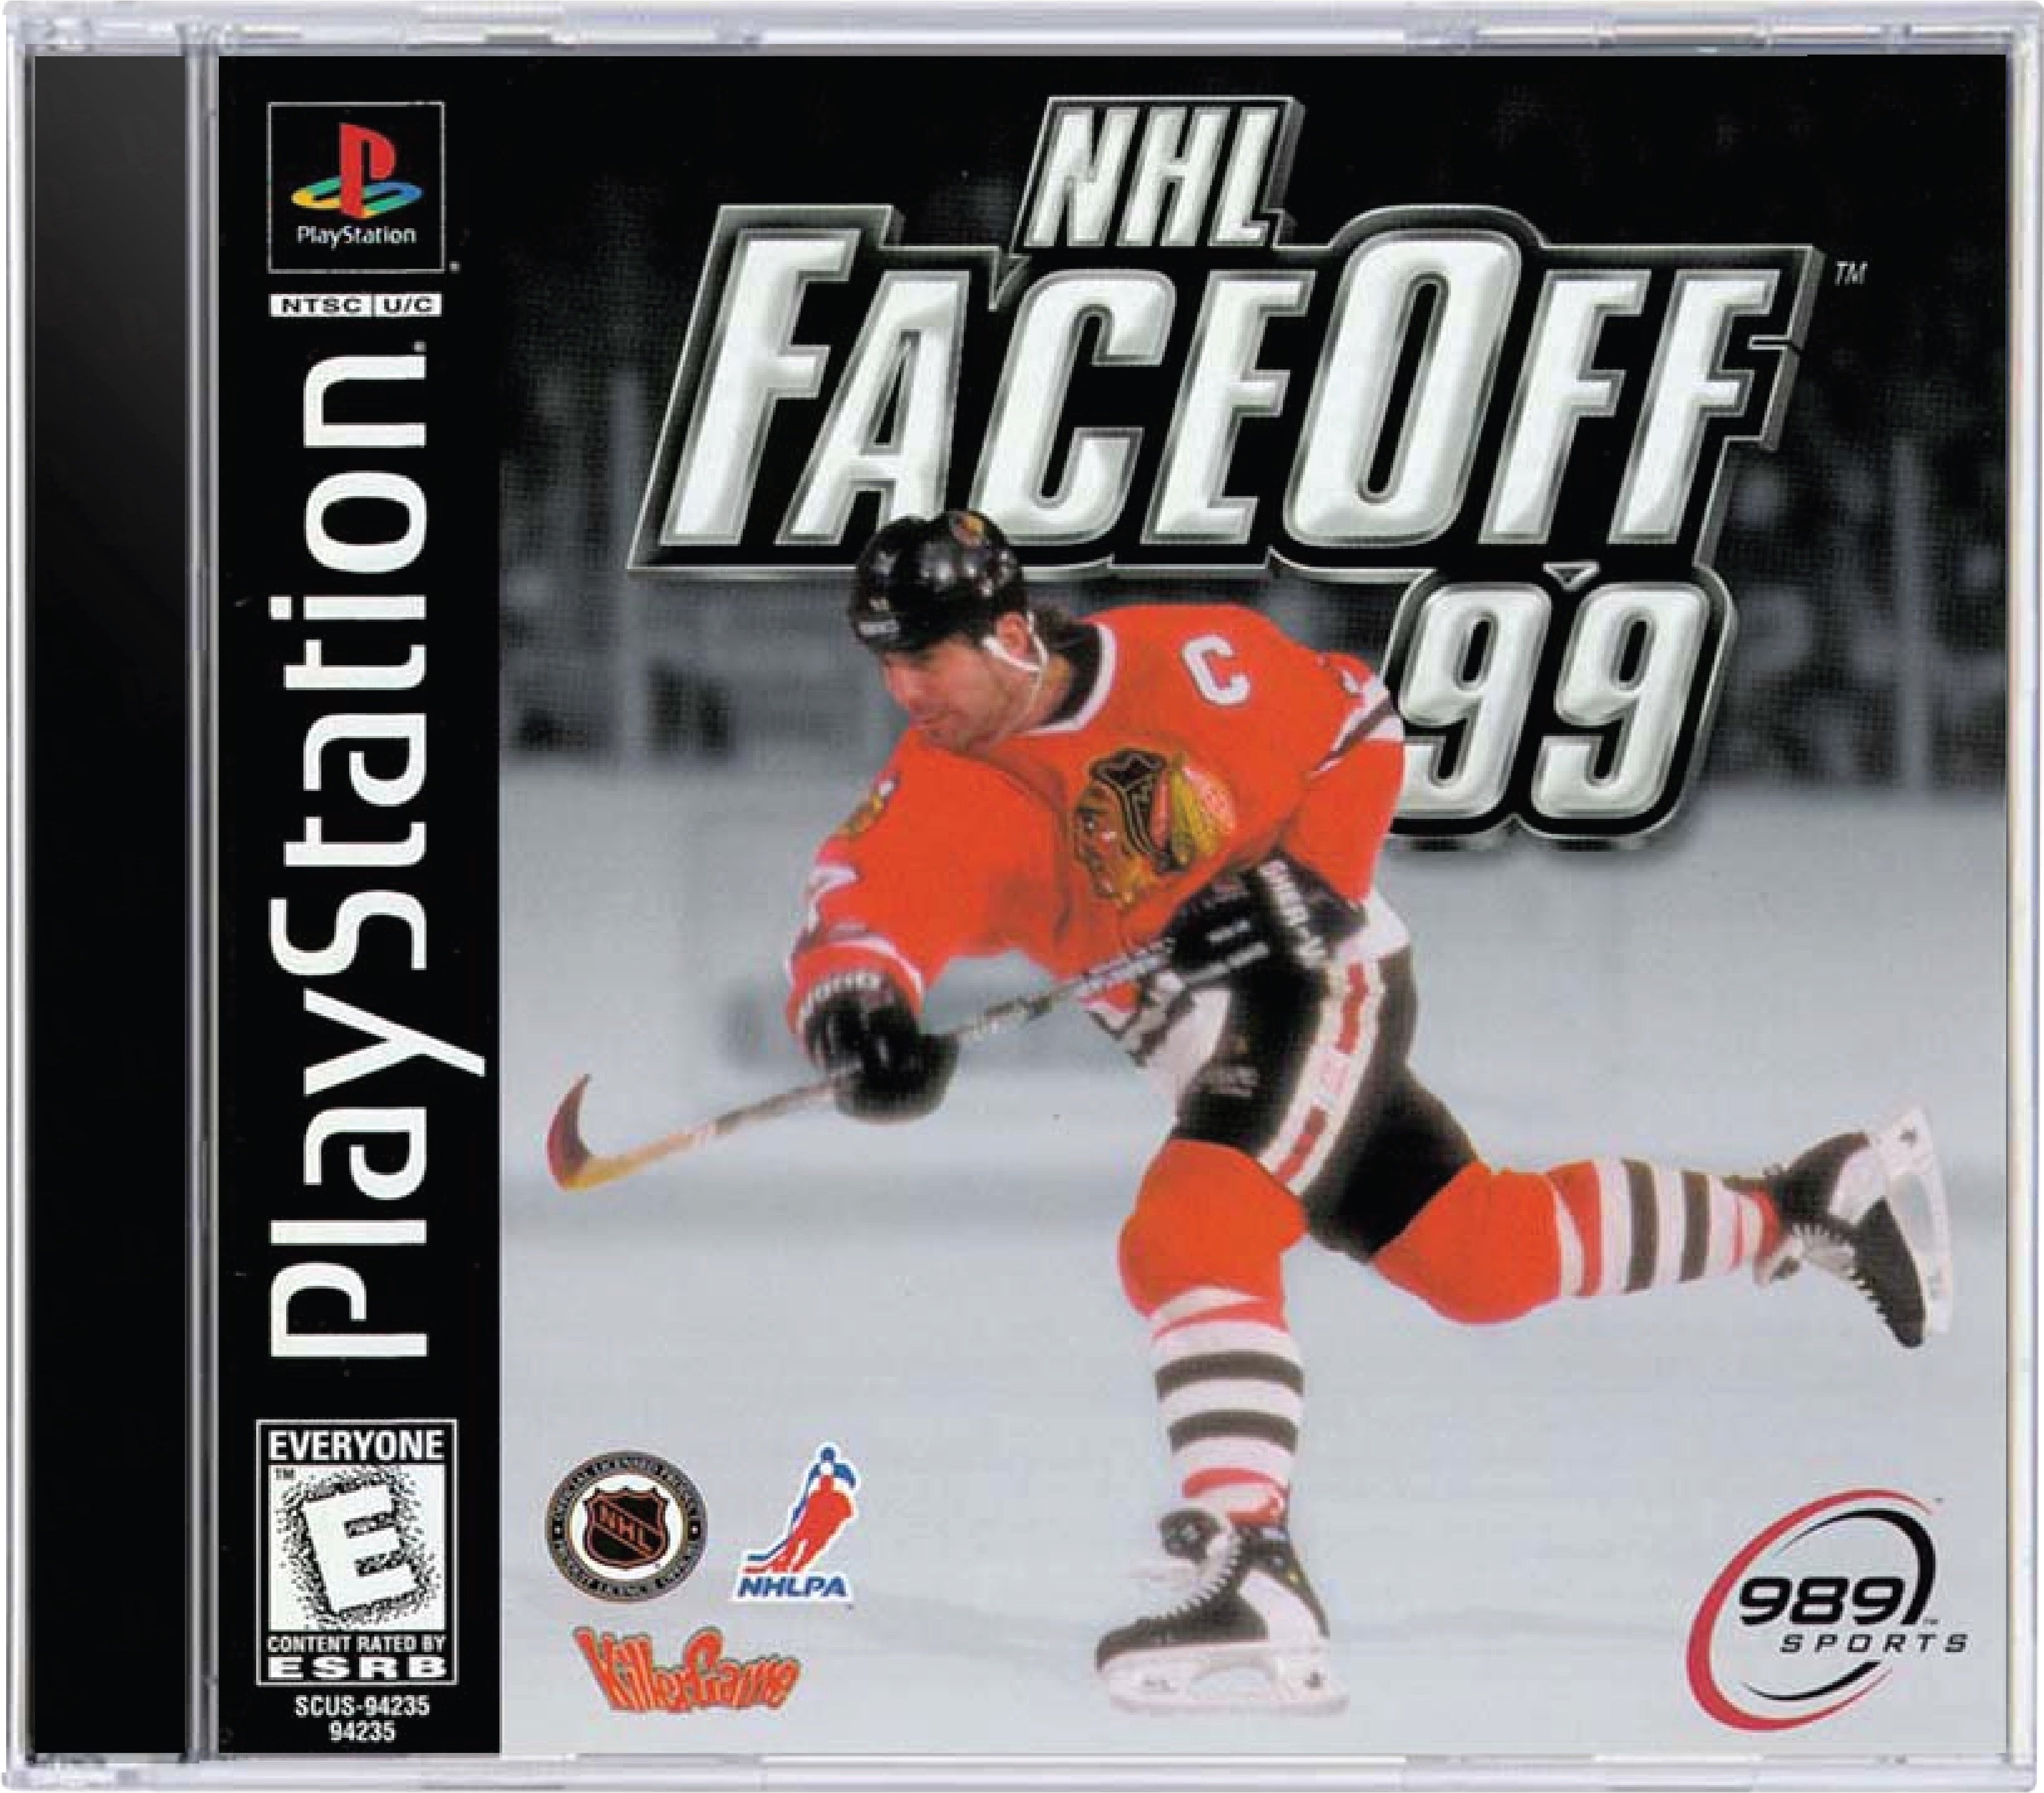 NHL FaceOff 99 Cover Art and Product Photo